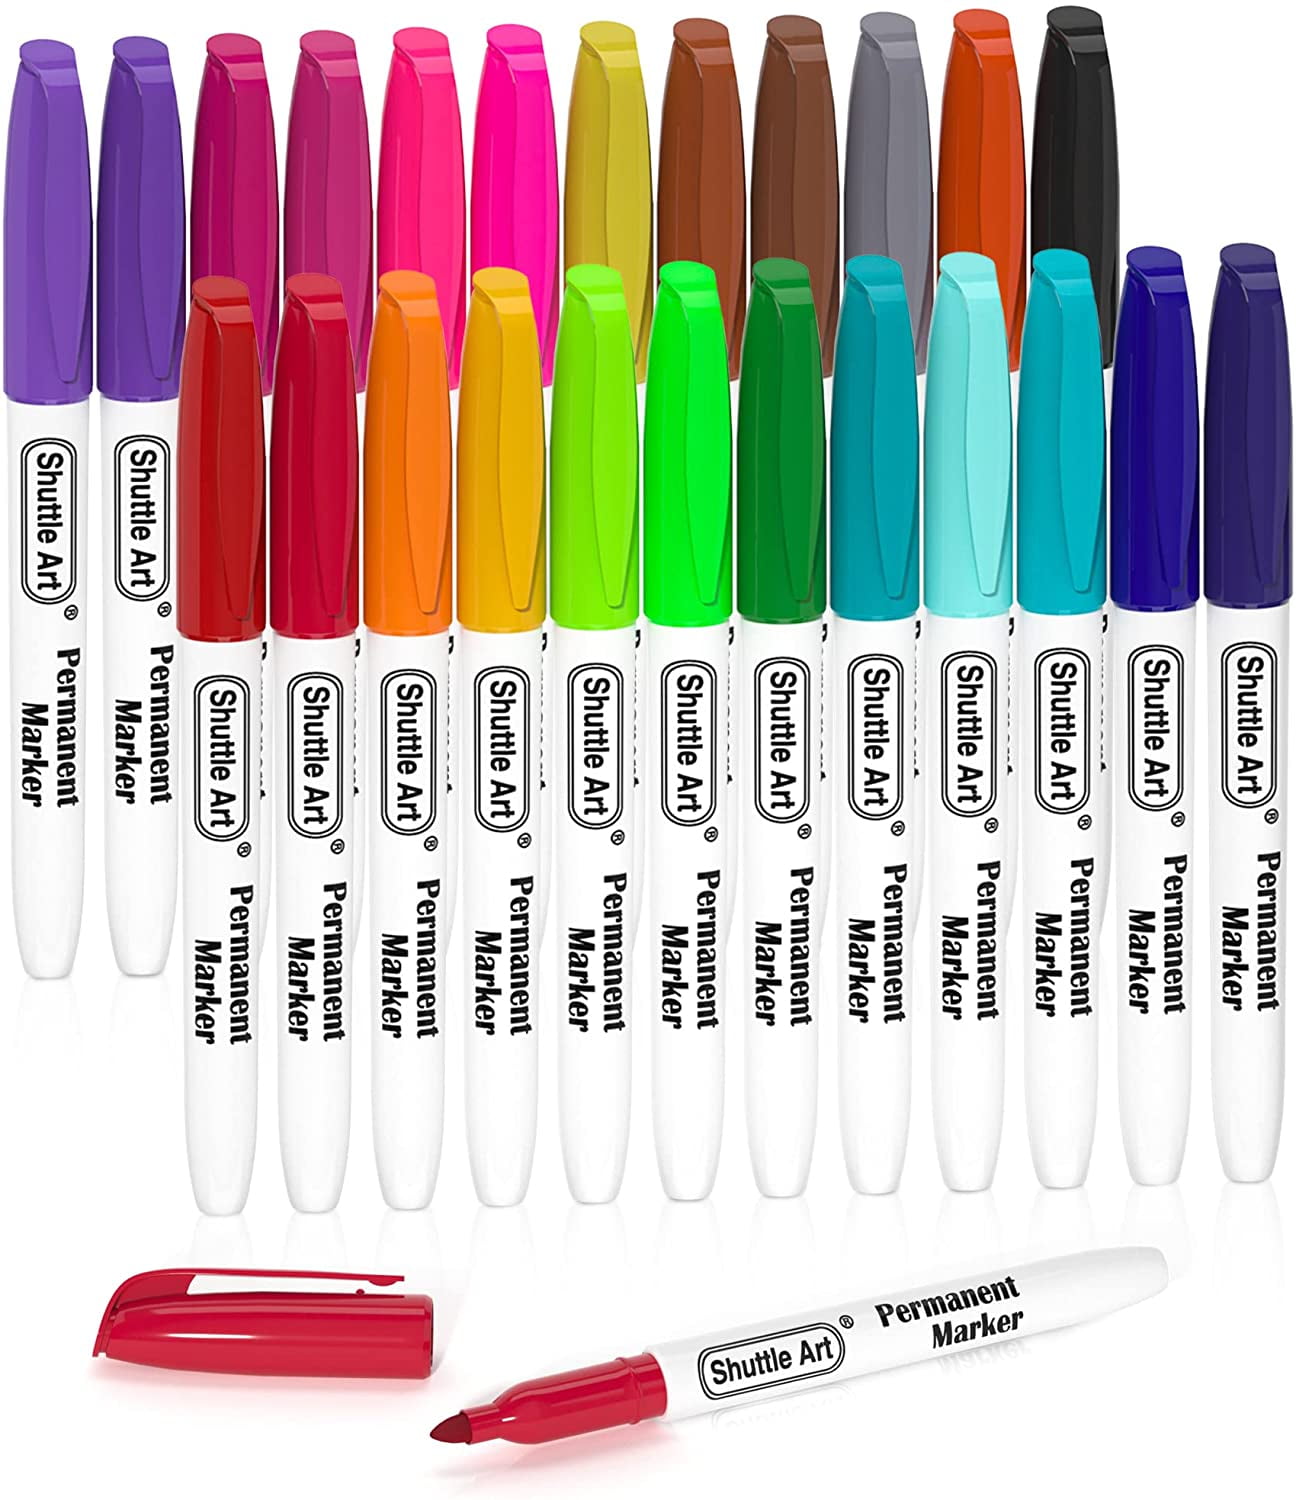 Permanent Markers, Shuttle Art 24 Colors Fine Point Assorted